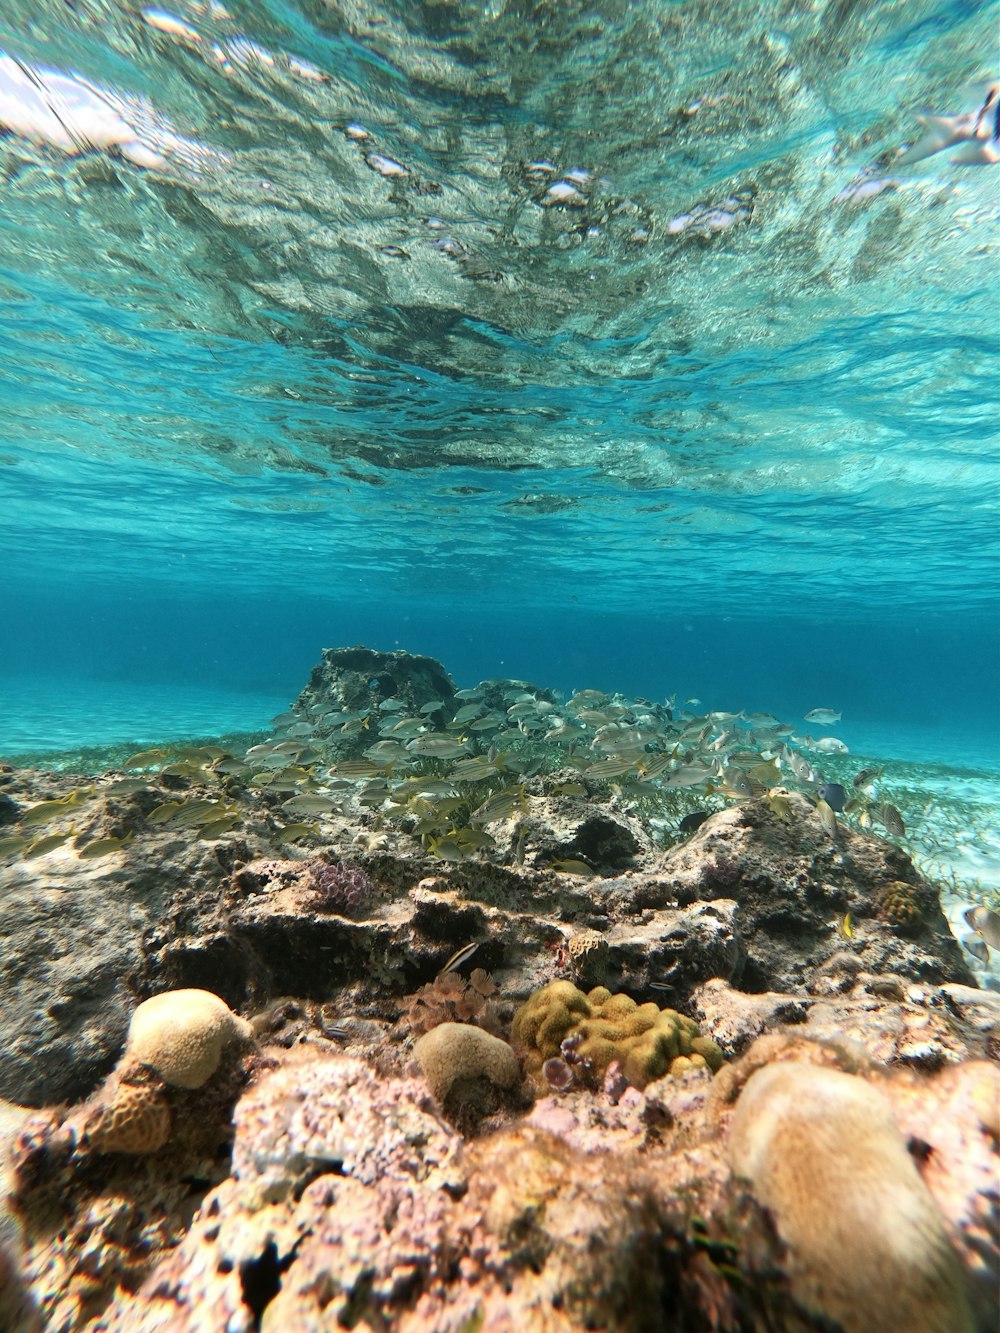 an underwater view of rocks and corals in the ocean